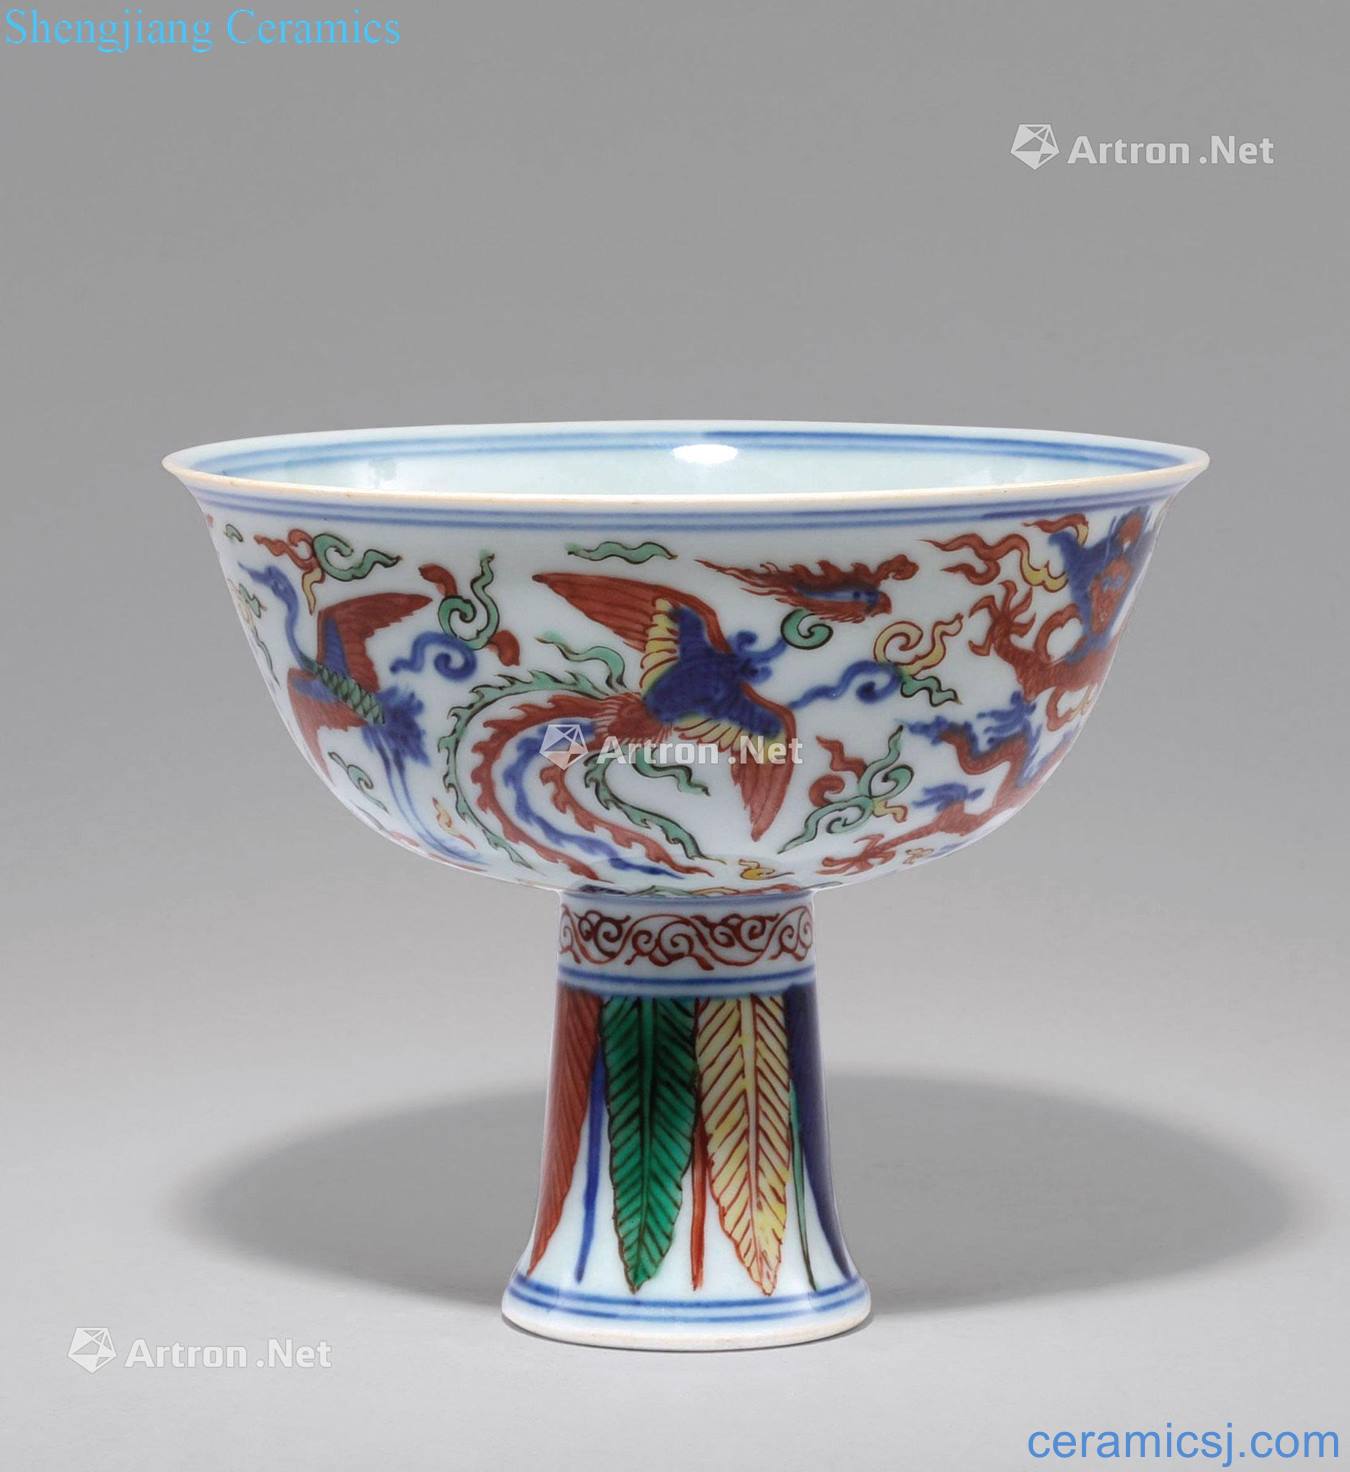 Ming Longfeng grain footed bowl